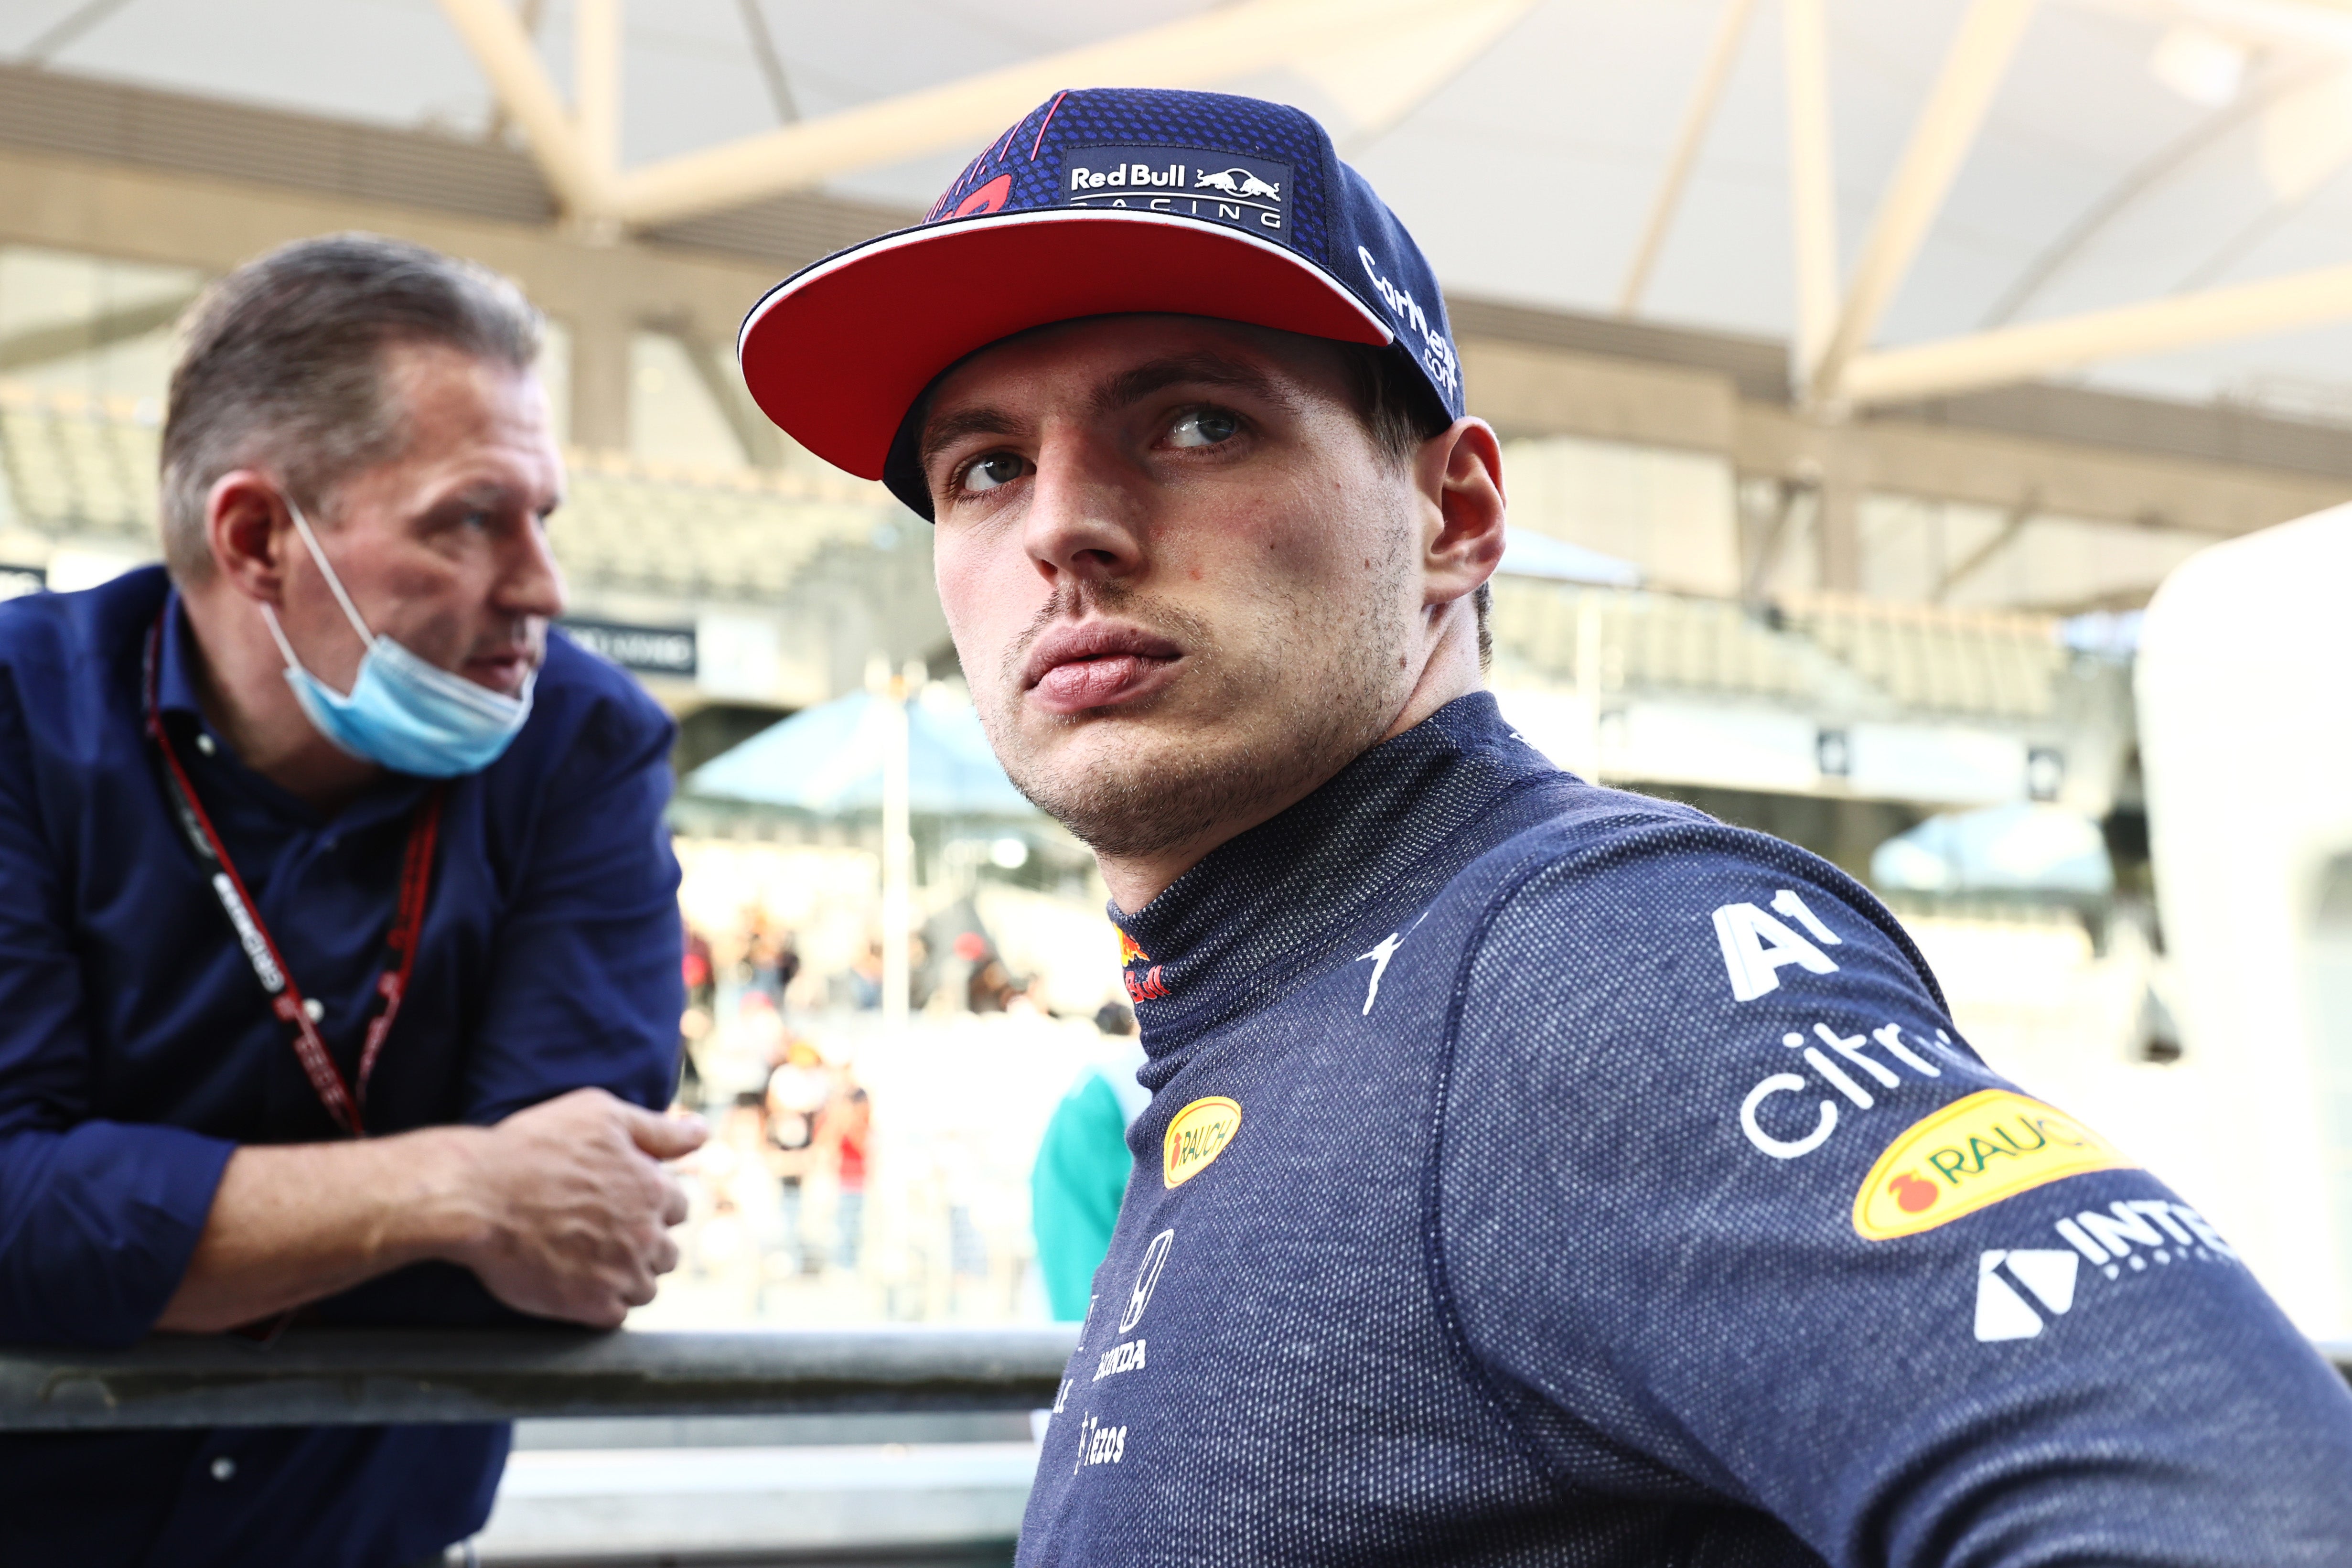 Jos Verstappen (left) has expressed his frustration at Red Bull’s strategy during the Monaco Grand Prix